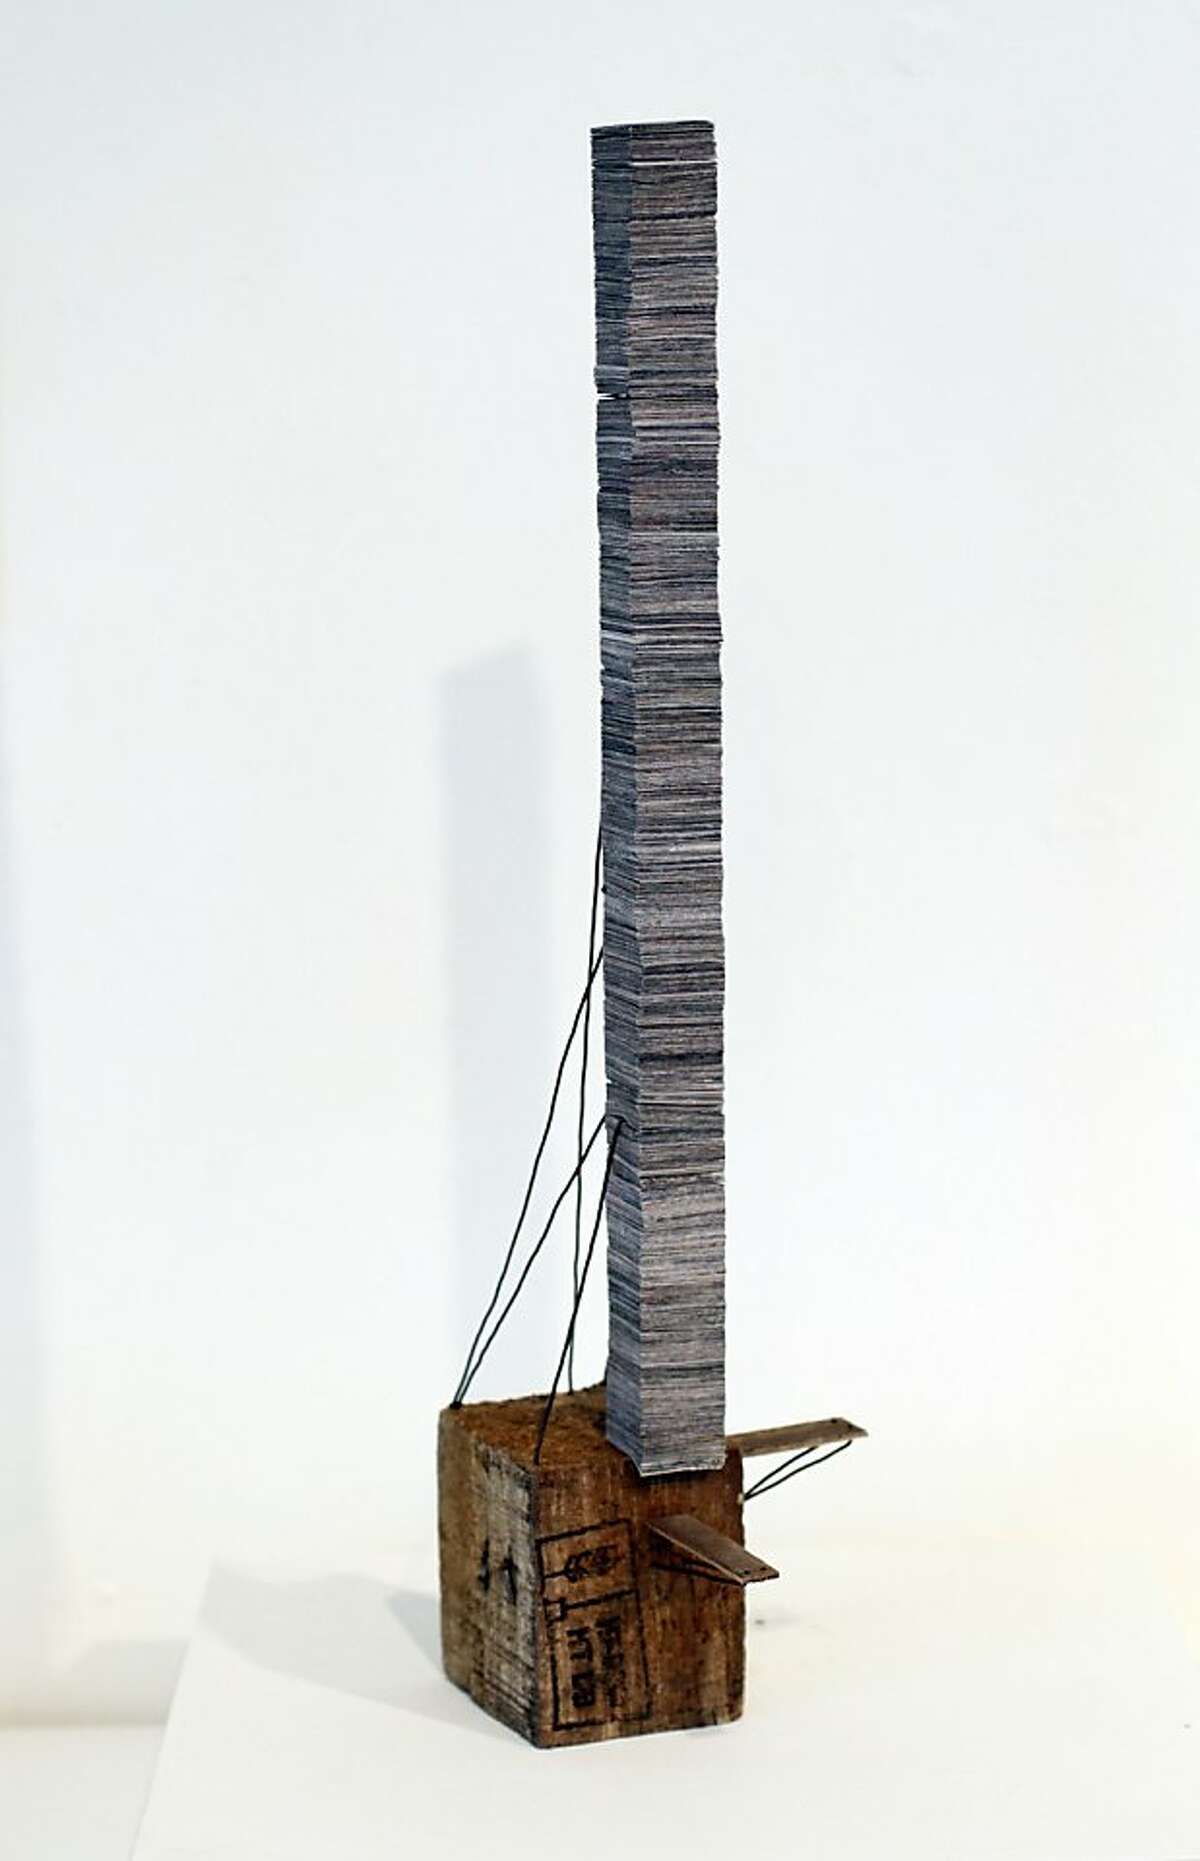 "Pressipice", a piece by Byron B. Kim, in The Altered Book Book Arts Show at the Marin Museum of Contemporary Art in Novato, Calif., Thursday, April 19, 2012. The show features 150 works all created from books. All of the pieces will be auctioned off to raise money for the museum.